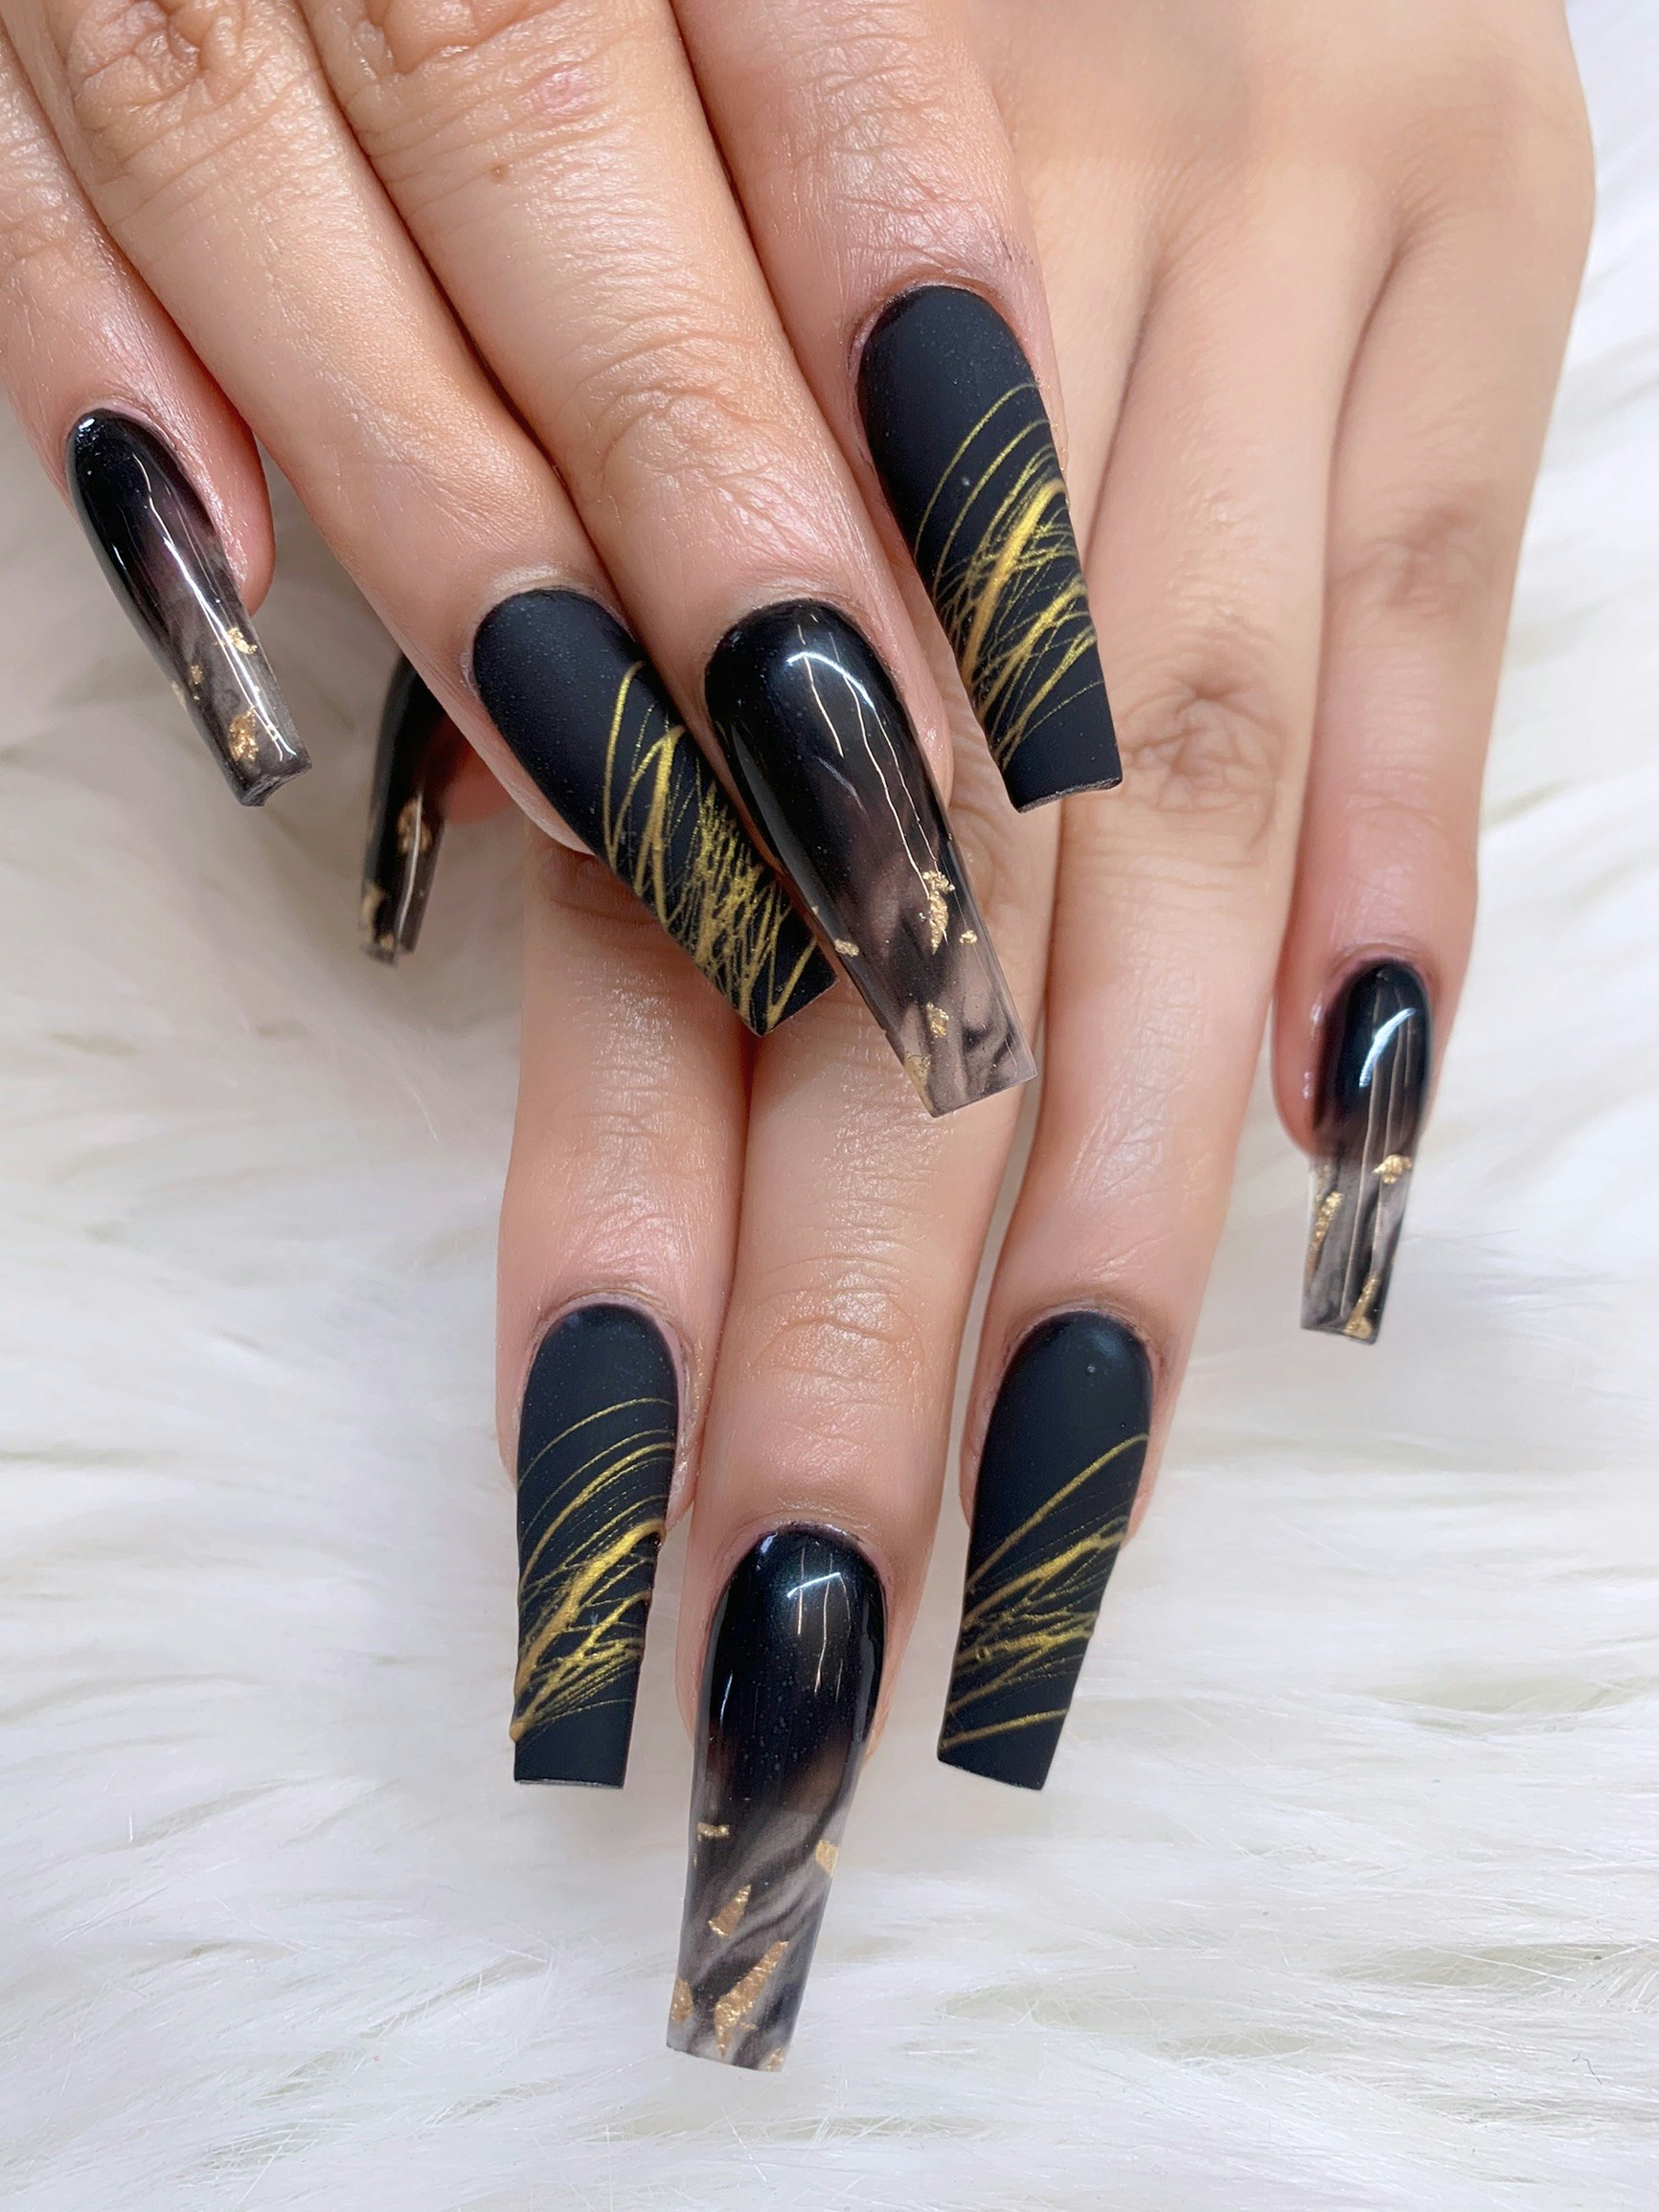 Black and Gold New Years Nails - 2013 Version